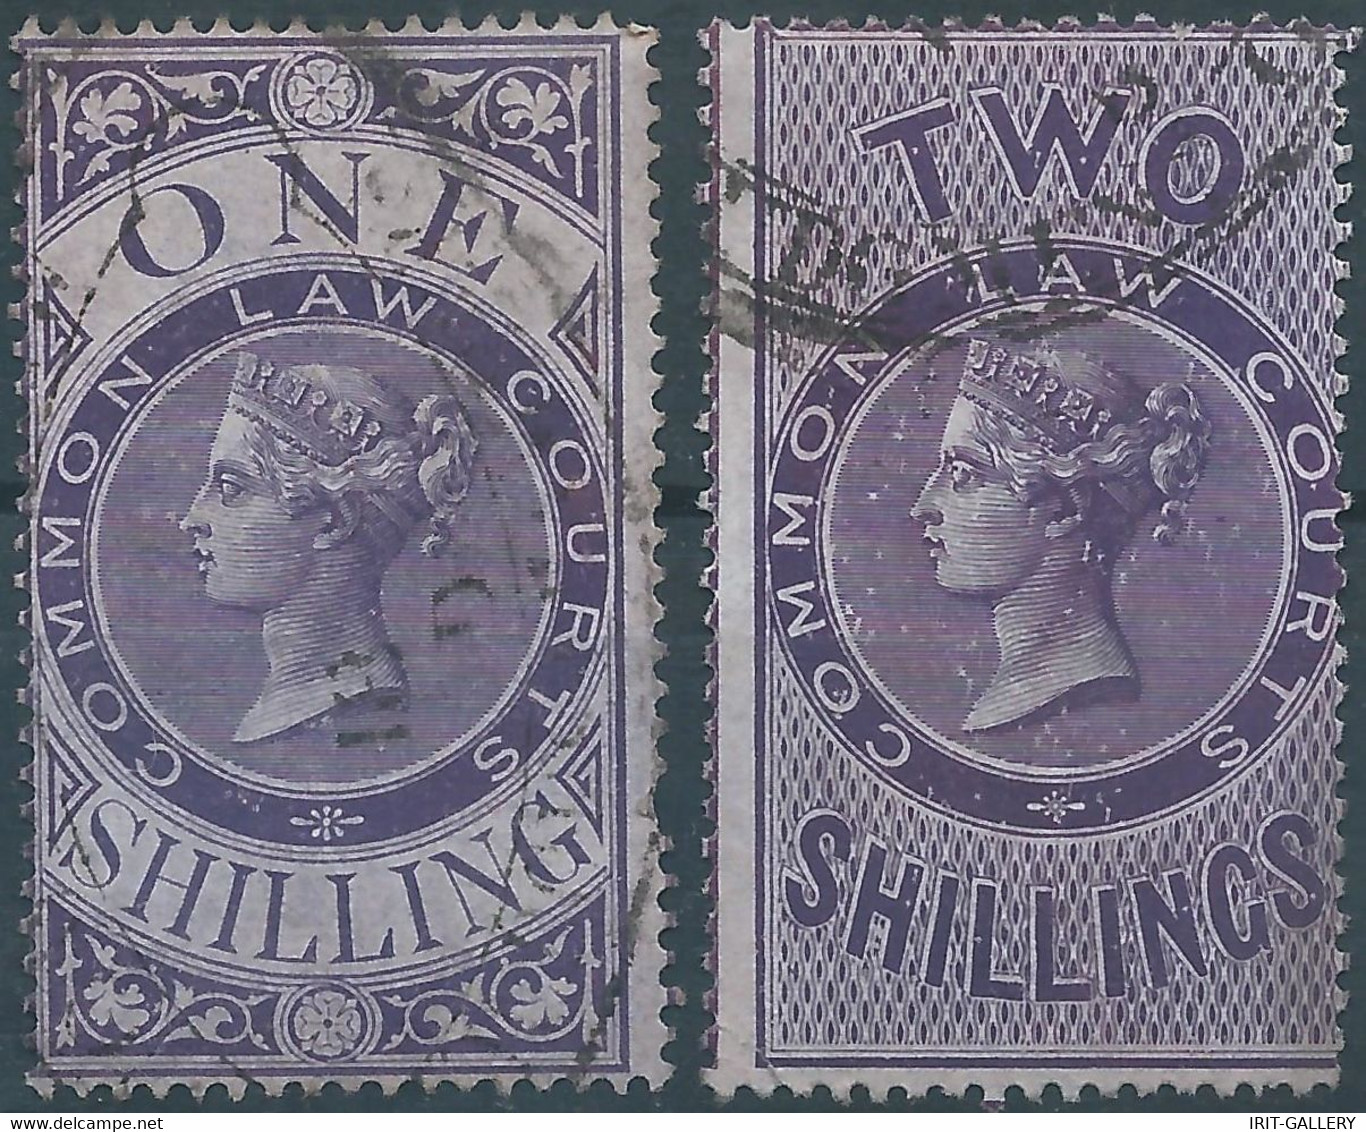 Great Britain-ENGLAND,Queen Victoria,1870/1880 Revenue Stamps Tax Fiscal COMMON LAW COURTS,1 & 2 Shillings,Used - Fiscaux